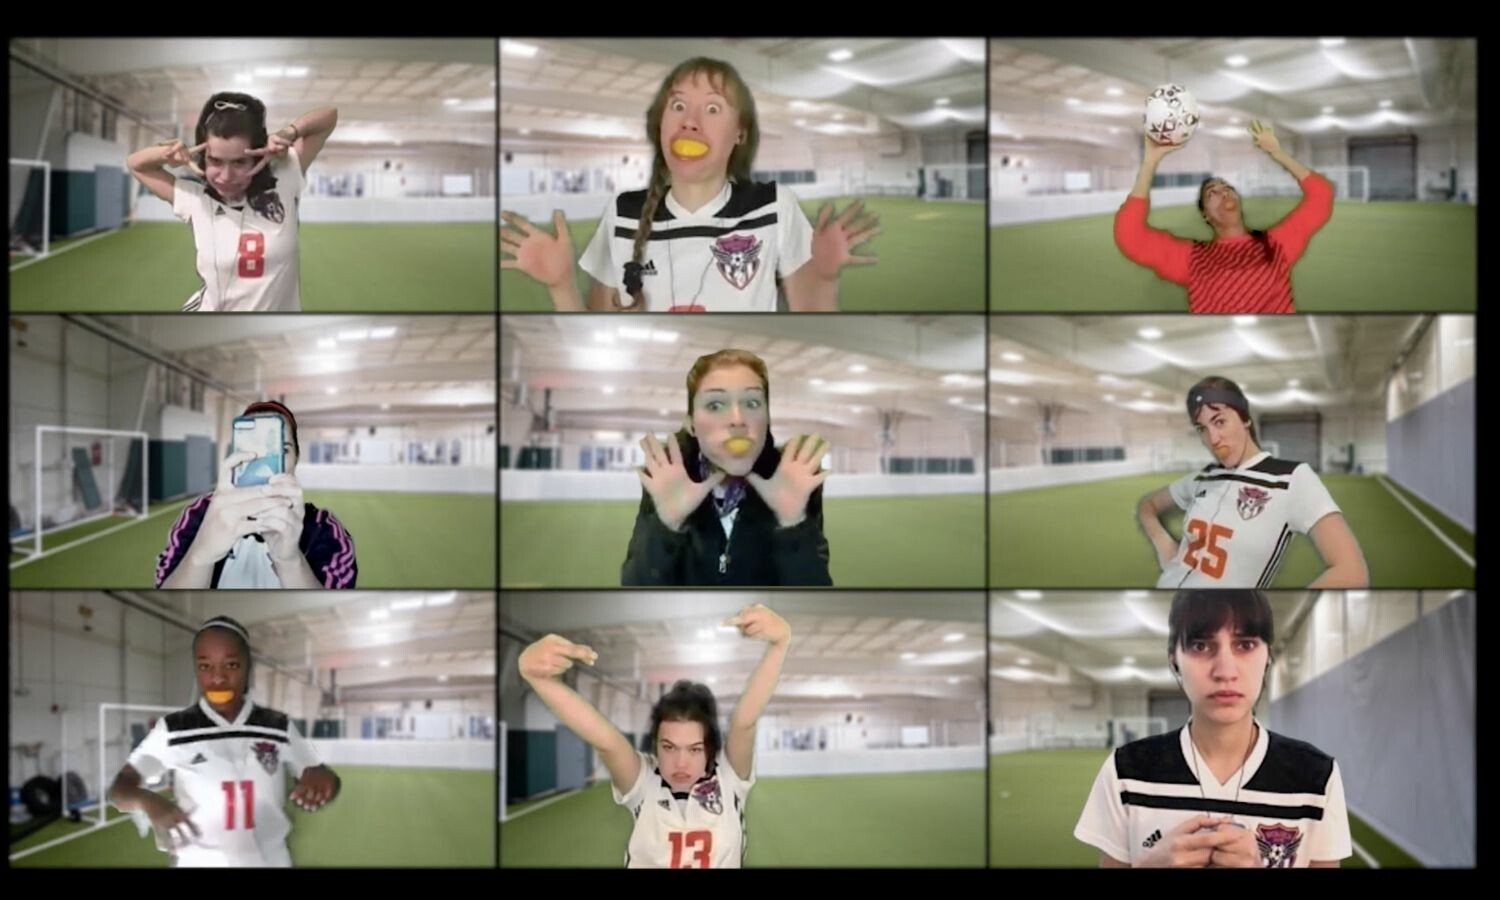 Nine actresses in soccer uniforms with most of them doing goofy gestures. Some have orange peels in their mouths.